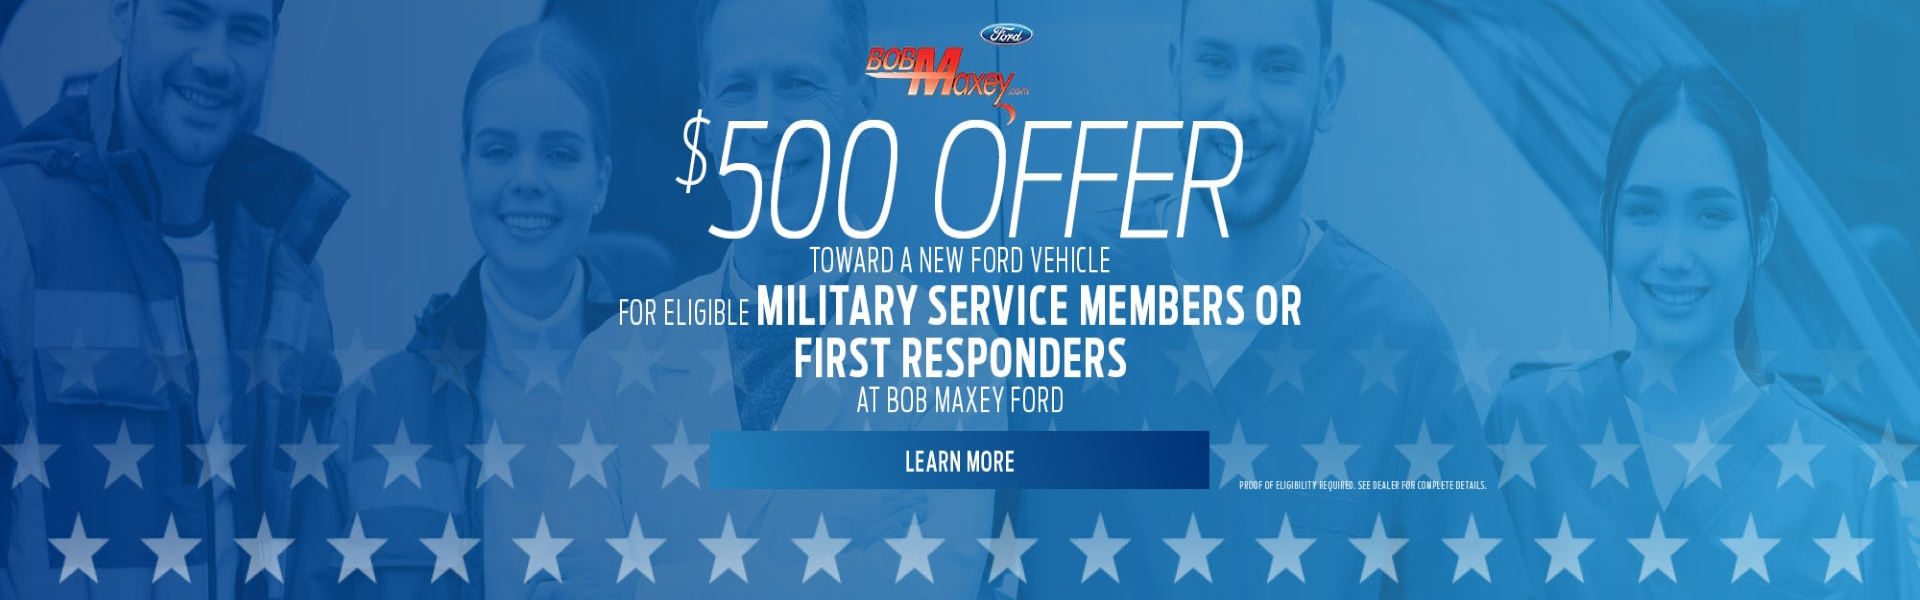 Military service members or first responders